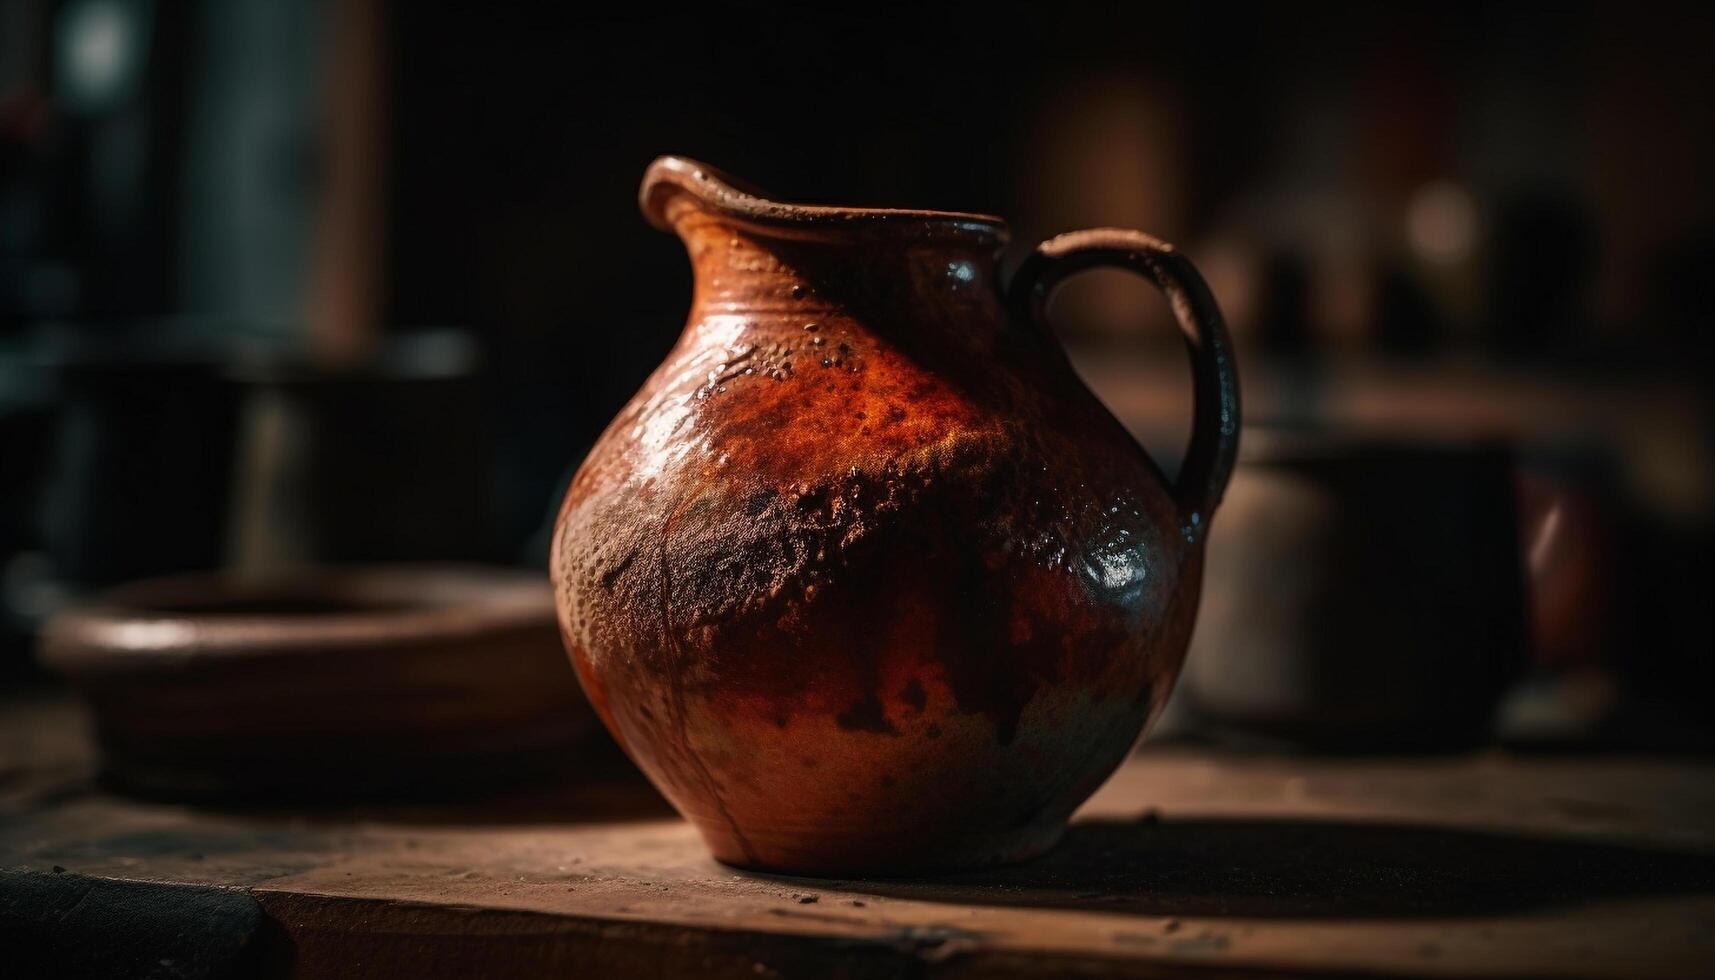 Rustic earthenware jug, a homemade antique craft from ancient cultures generated by AI photo